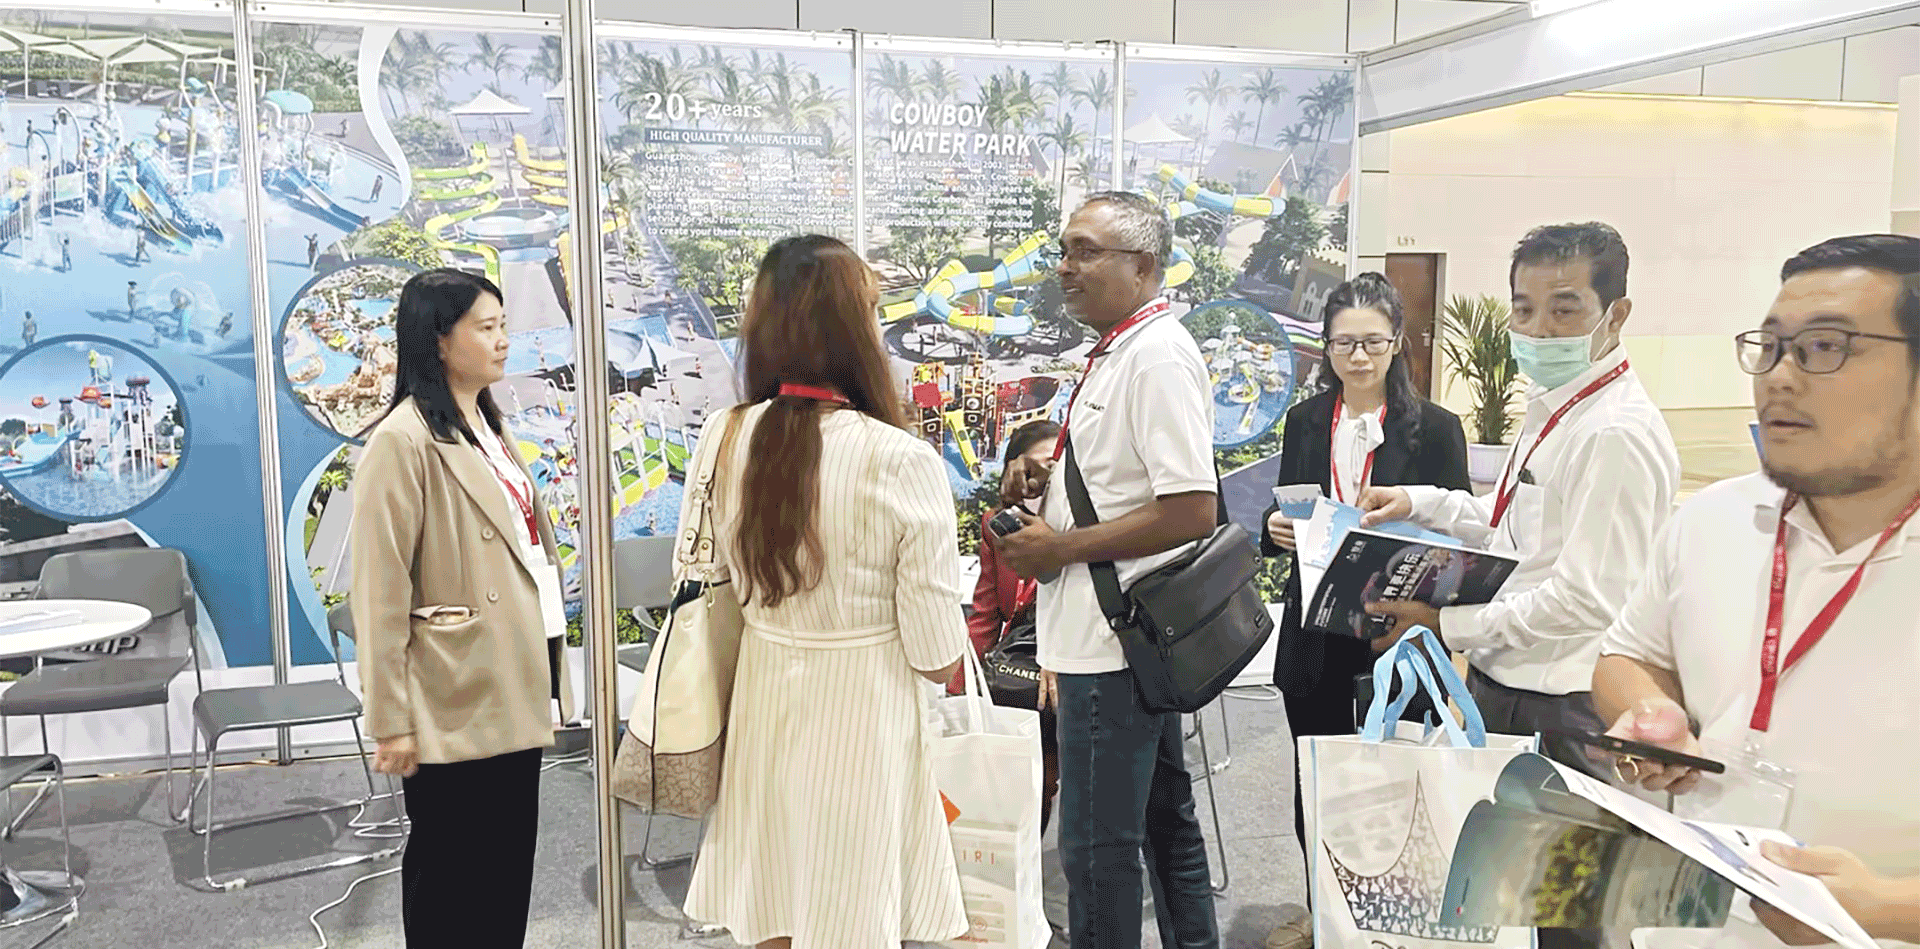 Cowboy Group Further Develops the Southeast Asian Market and Recreates a new Glory at TAAPE Expo